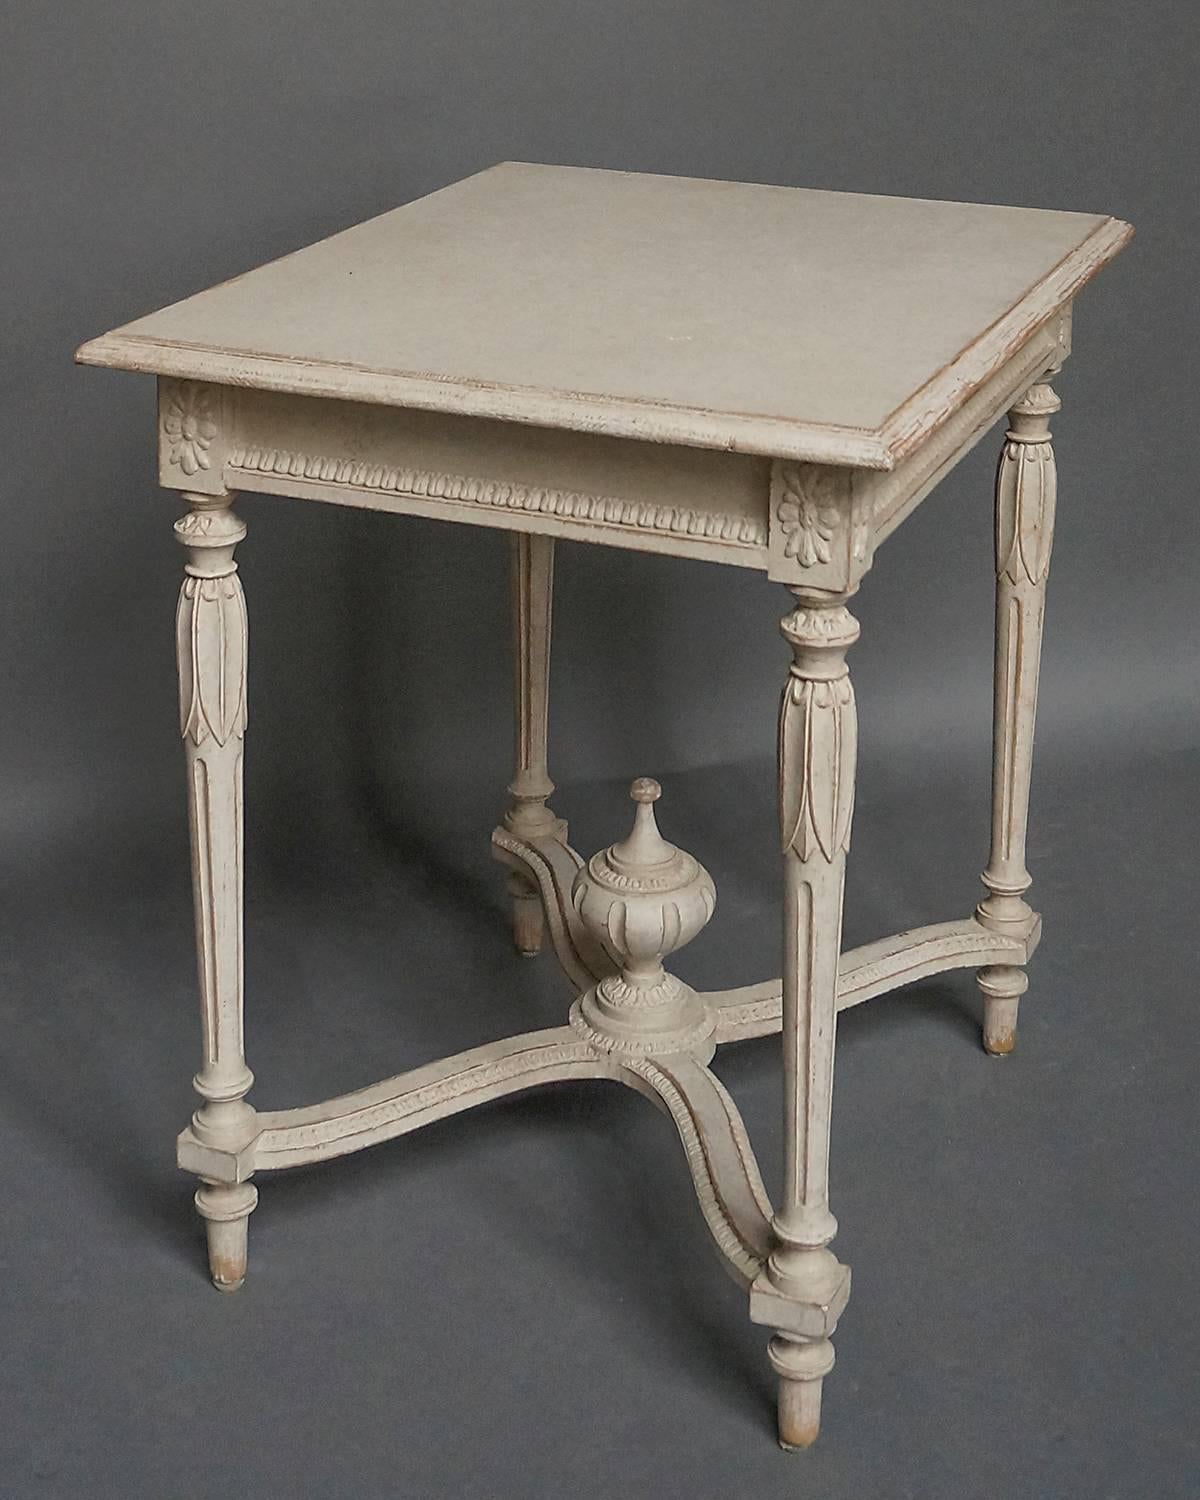 Swedish neoclassical style side table, circa 1900, with exceptional detail. Shaped top with lambs tongue detail on the apron. Applied floral detail on the corner blocks above turned and reeded legs with lotus leaves circling the top. At the center